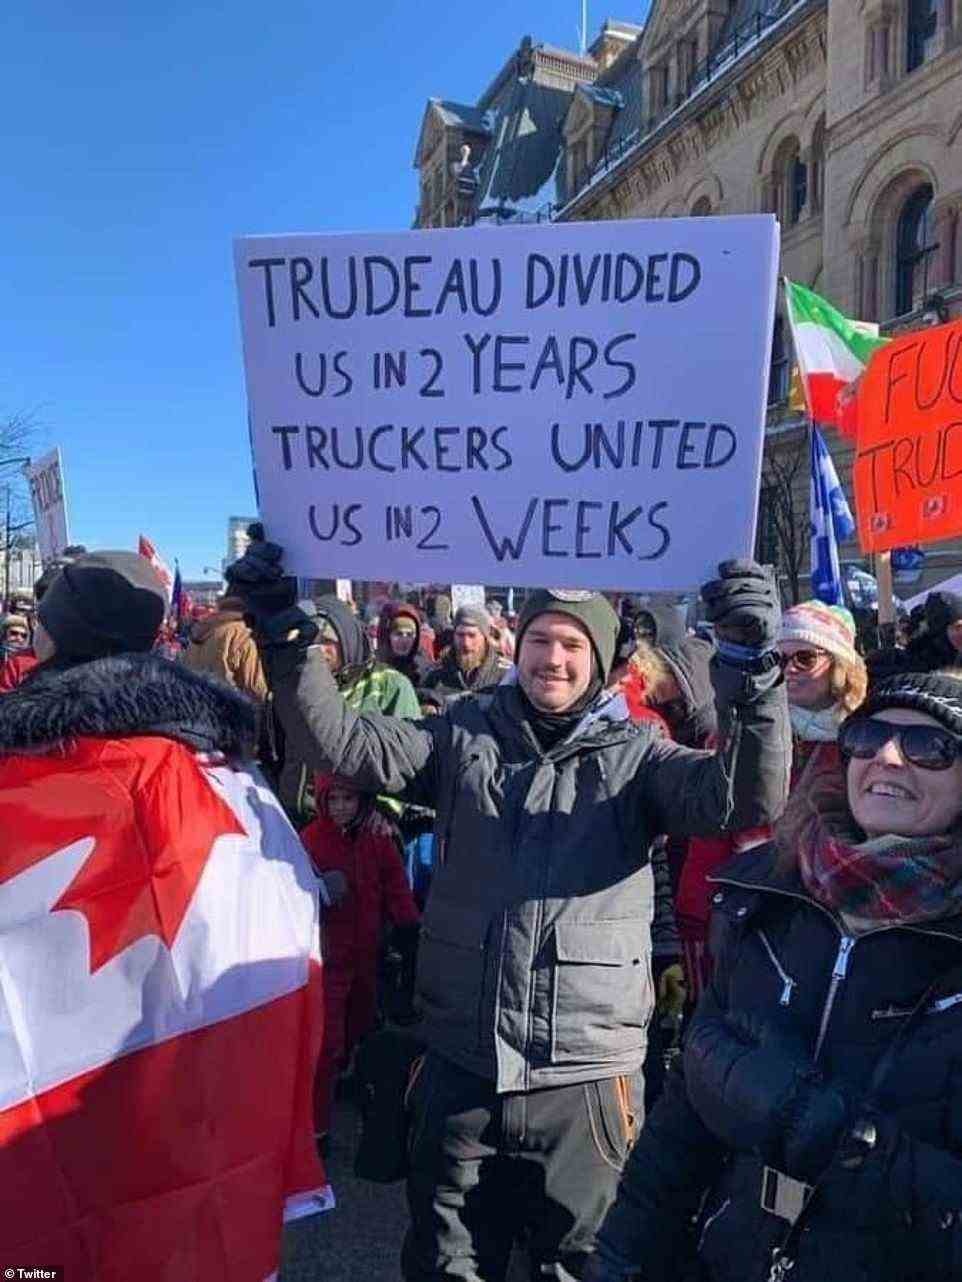 One man holds up a sign arguing how the truckers have 'united' the country